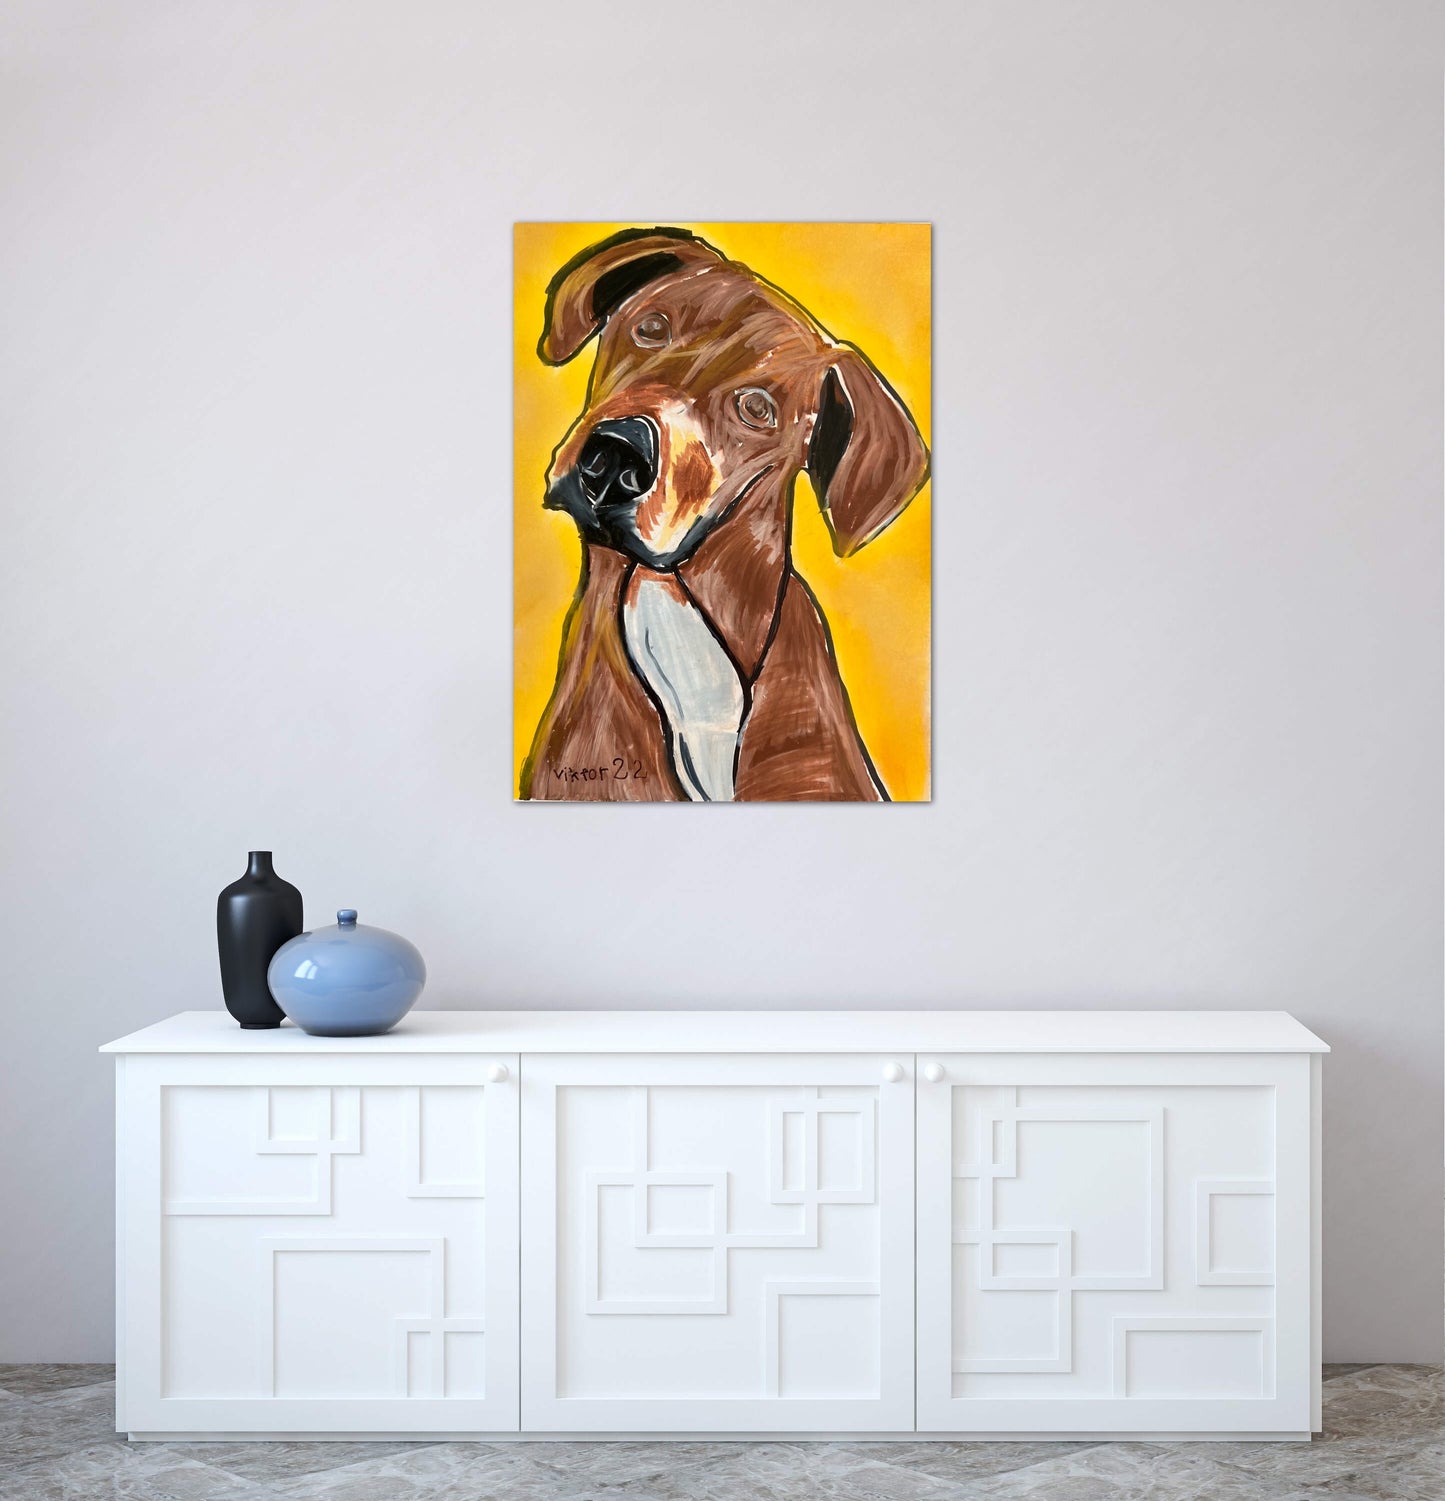 Amazing Dog - Print, Poster or Stretched Canvas Print in more sizes